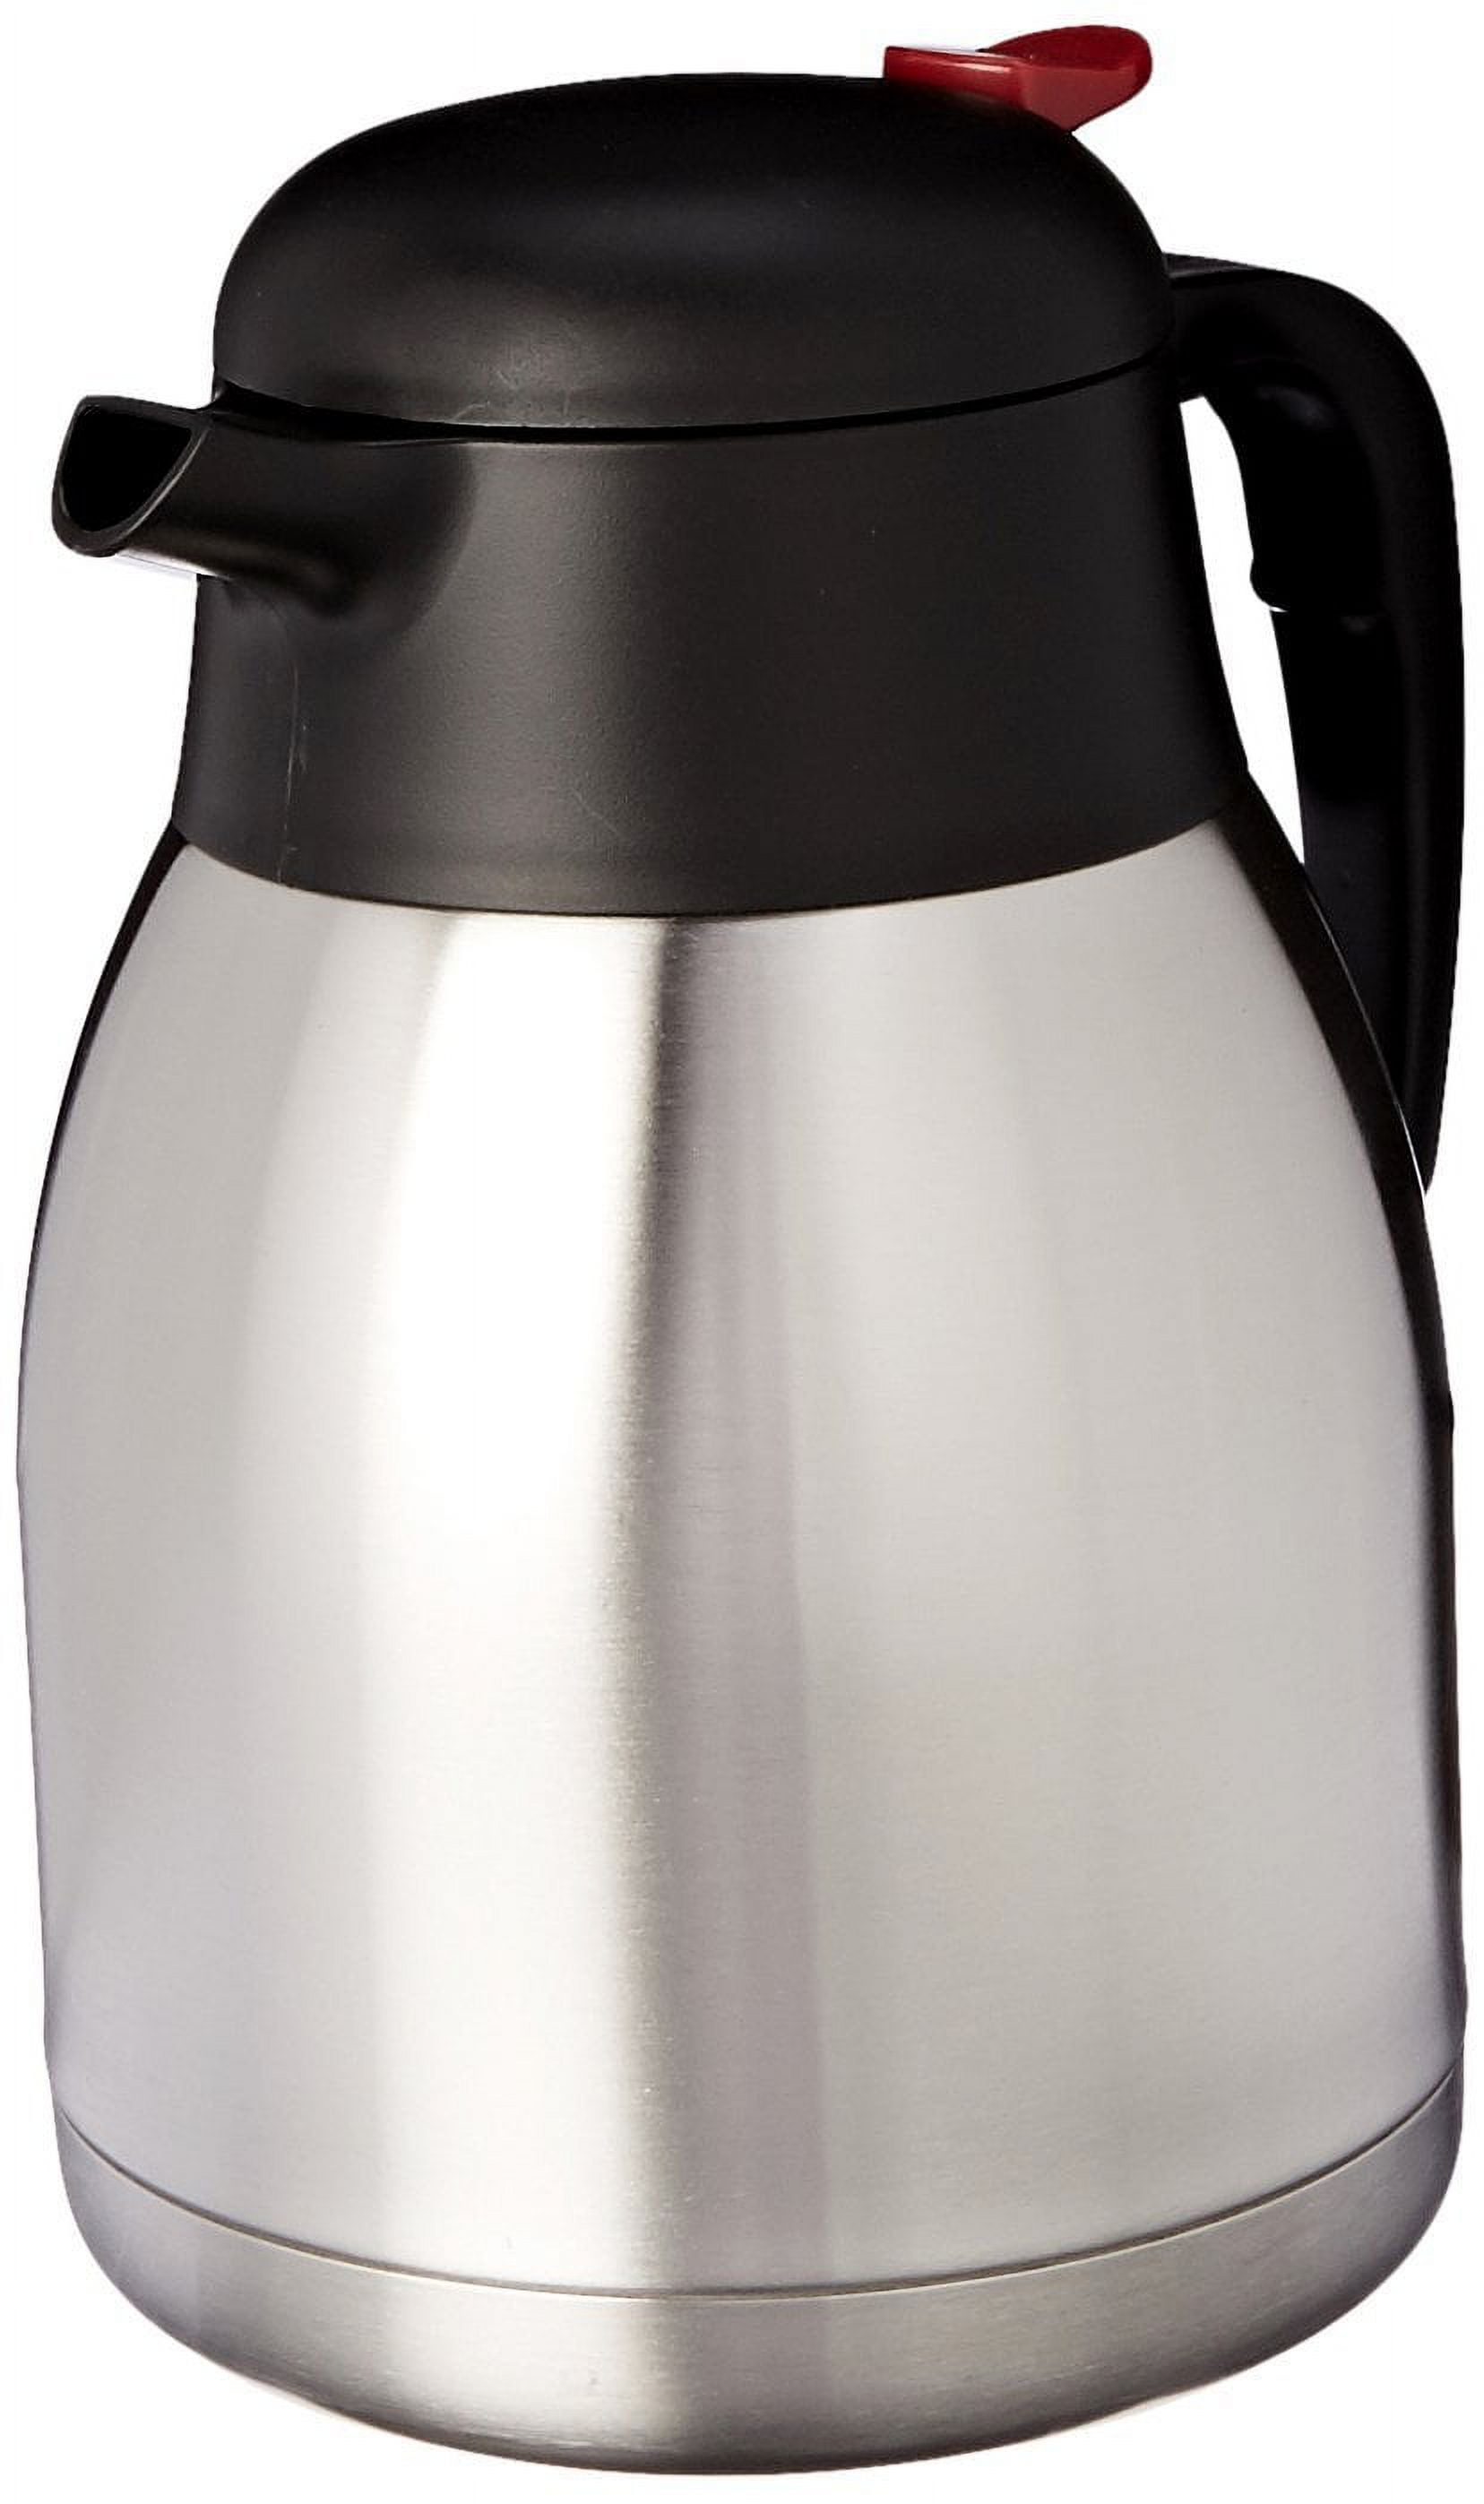 Bunn 51746.0001 64 oz. Stainless Steel Economy Thermal Carafe - Black Top -  12/Case